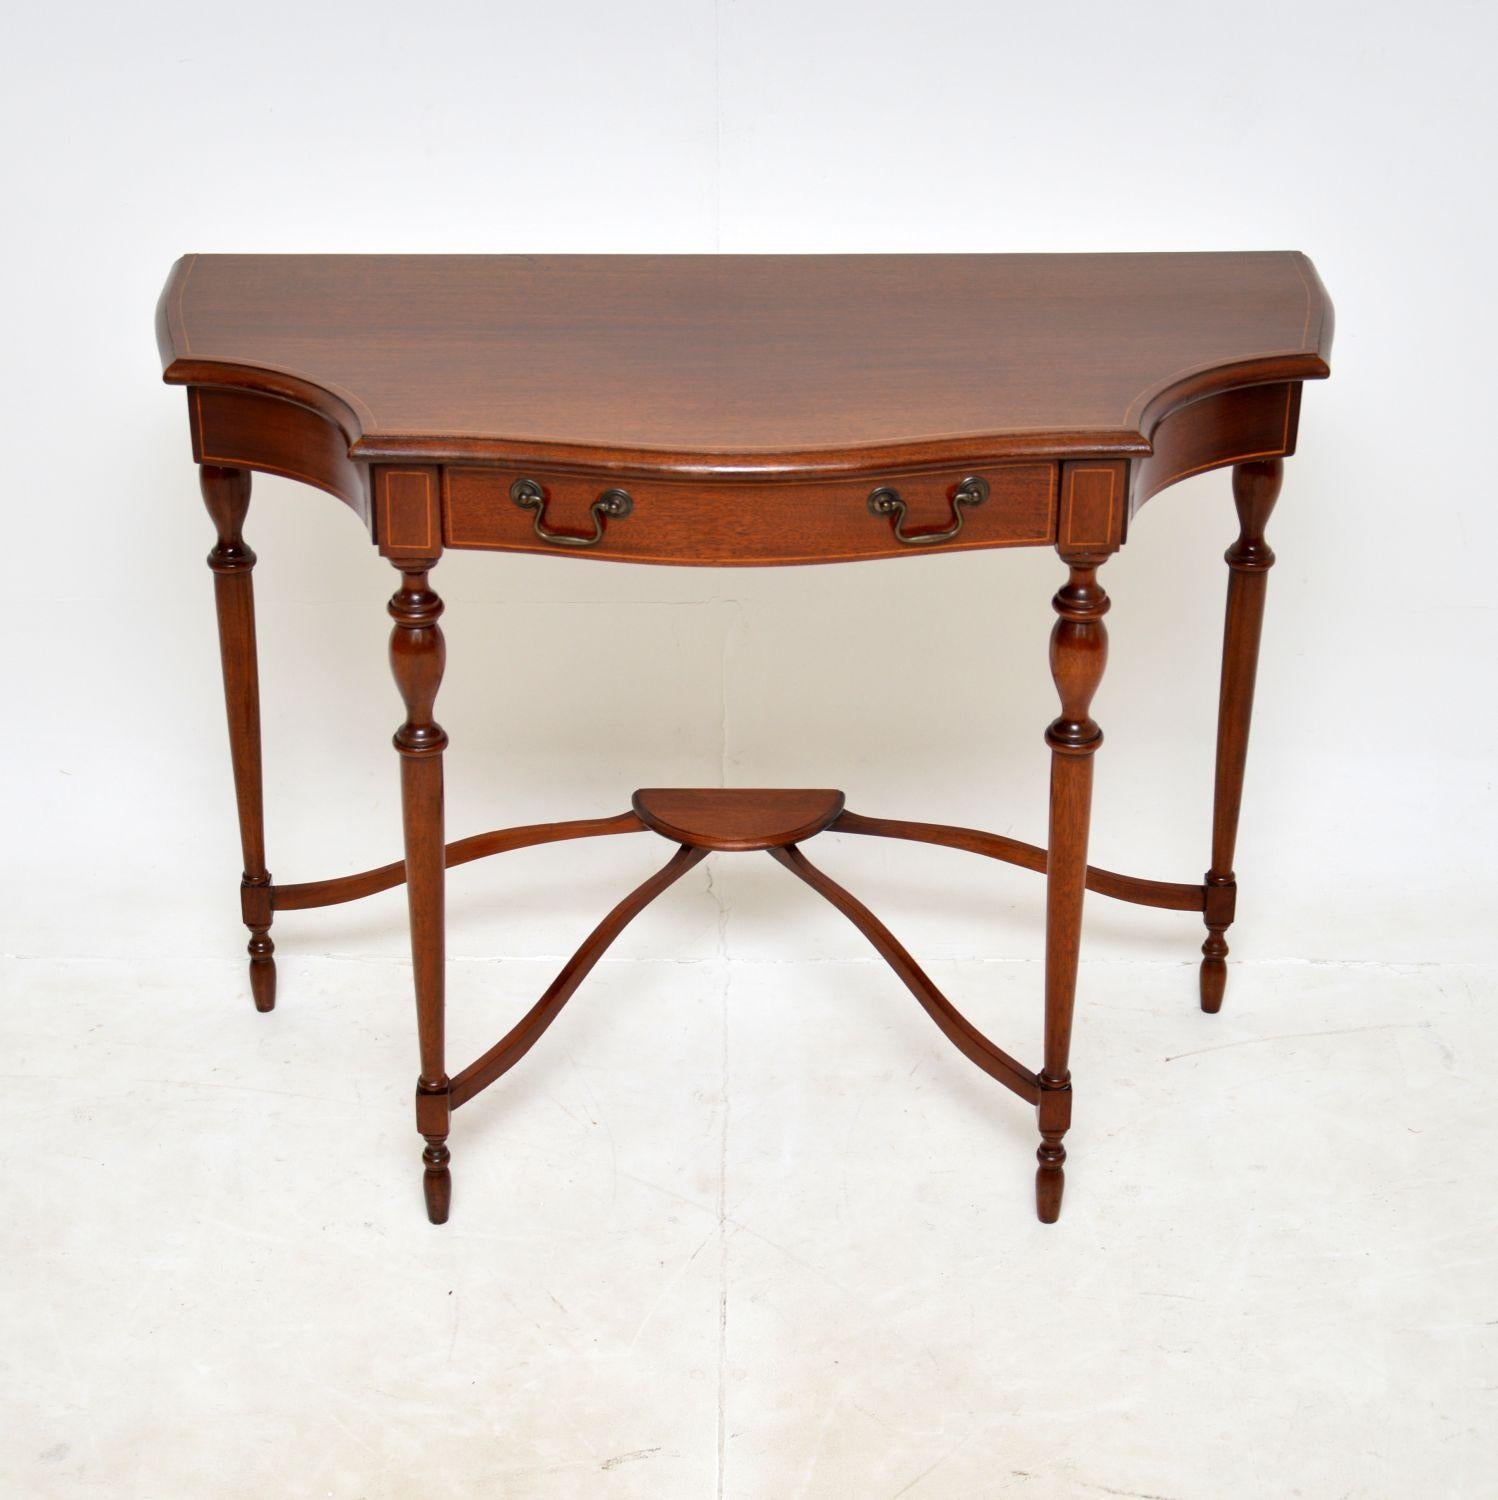 A beautiful and elegant antique console table in the Georgian style. This was made in England, it dates from around the 1950’s.

The quality is excellent, this sits on finely turned legs and has a gorgeous serpentine shaped front. There is